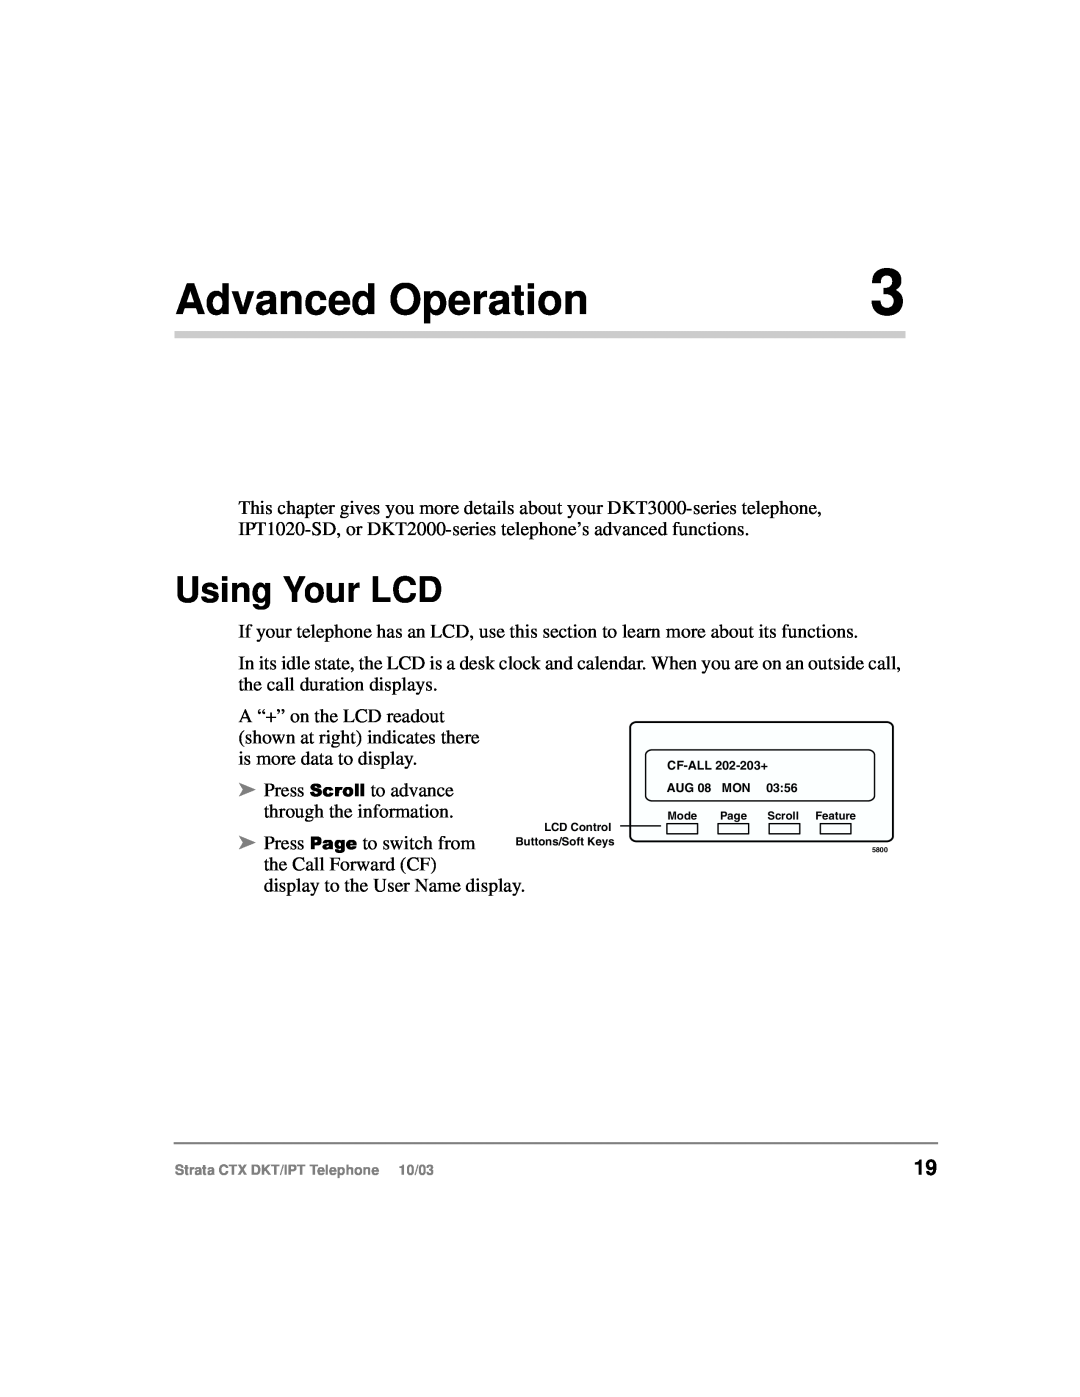 Toshiba DKT, IPT manual Advanced Operation, Using Your LCD 